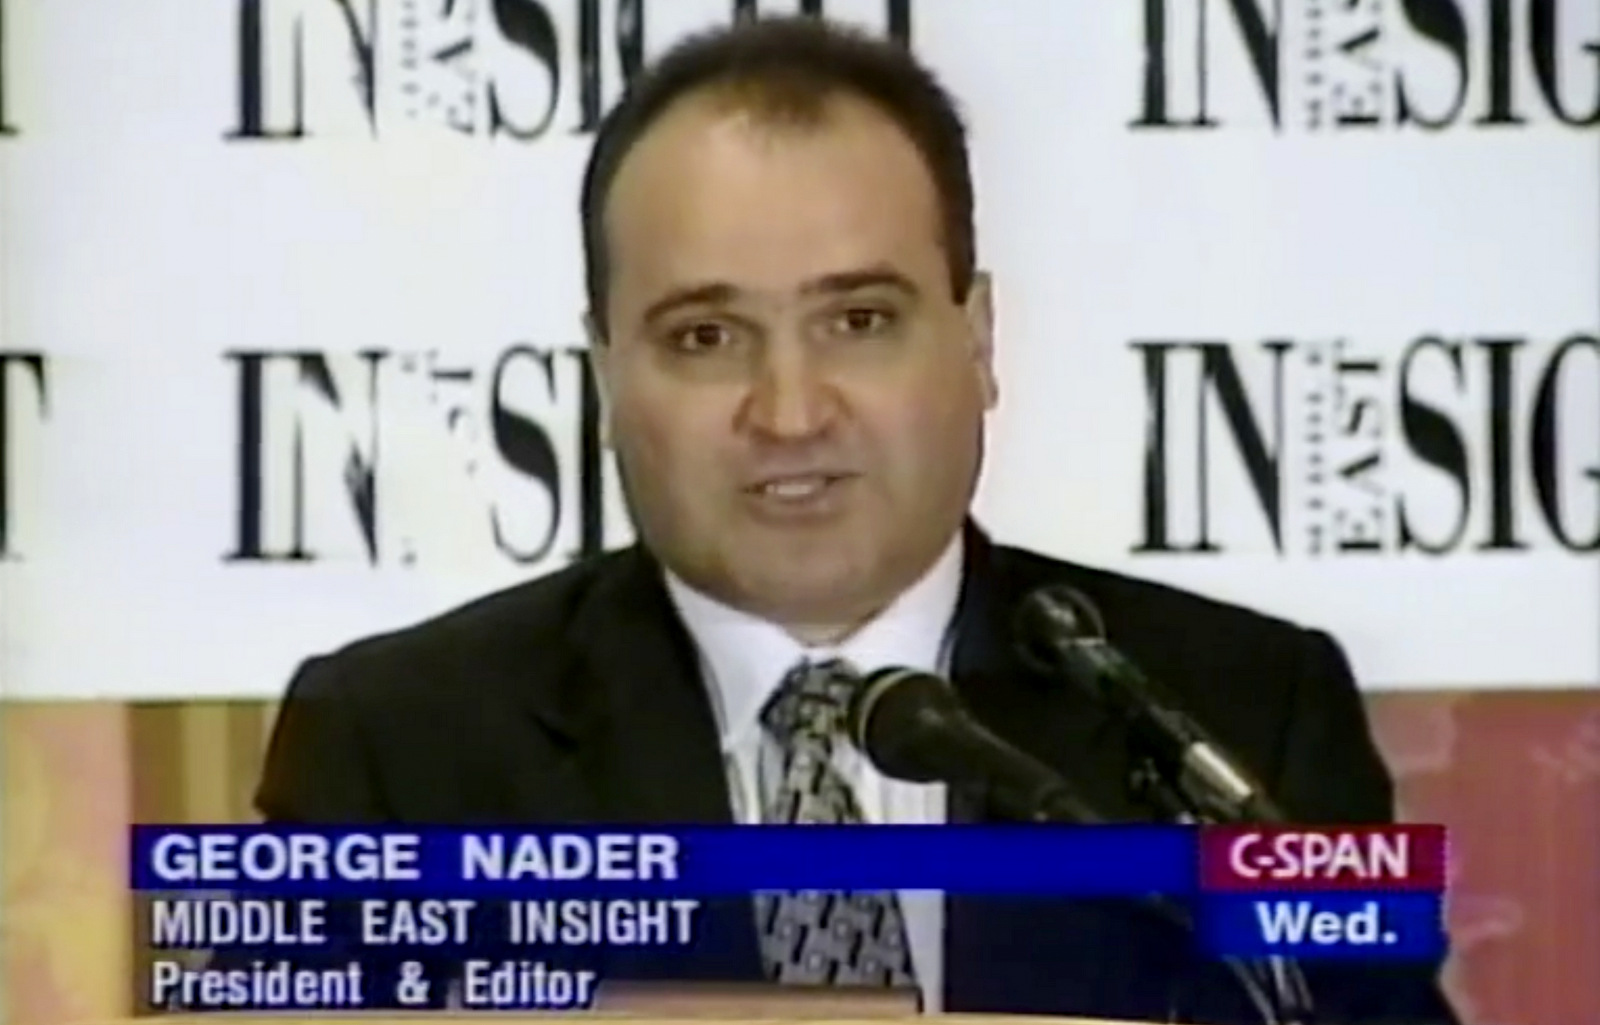 George Nader, president and editor of Middle East Insight and former adviser to the United Arab Emirates. (C-SPAN via AP)